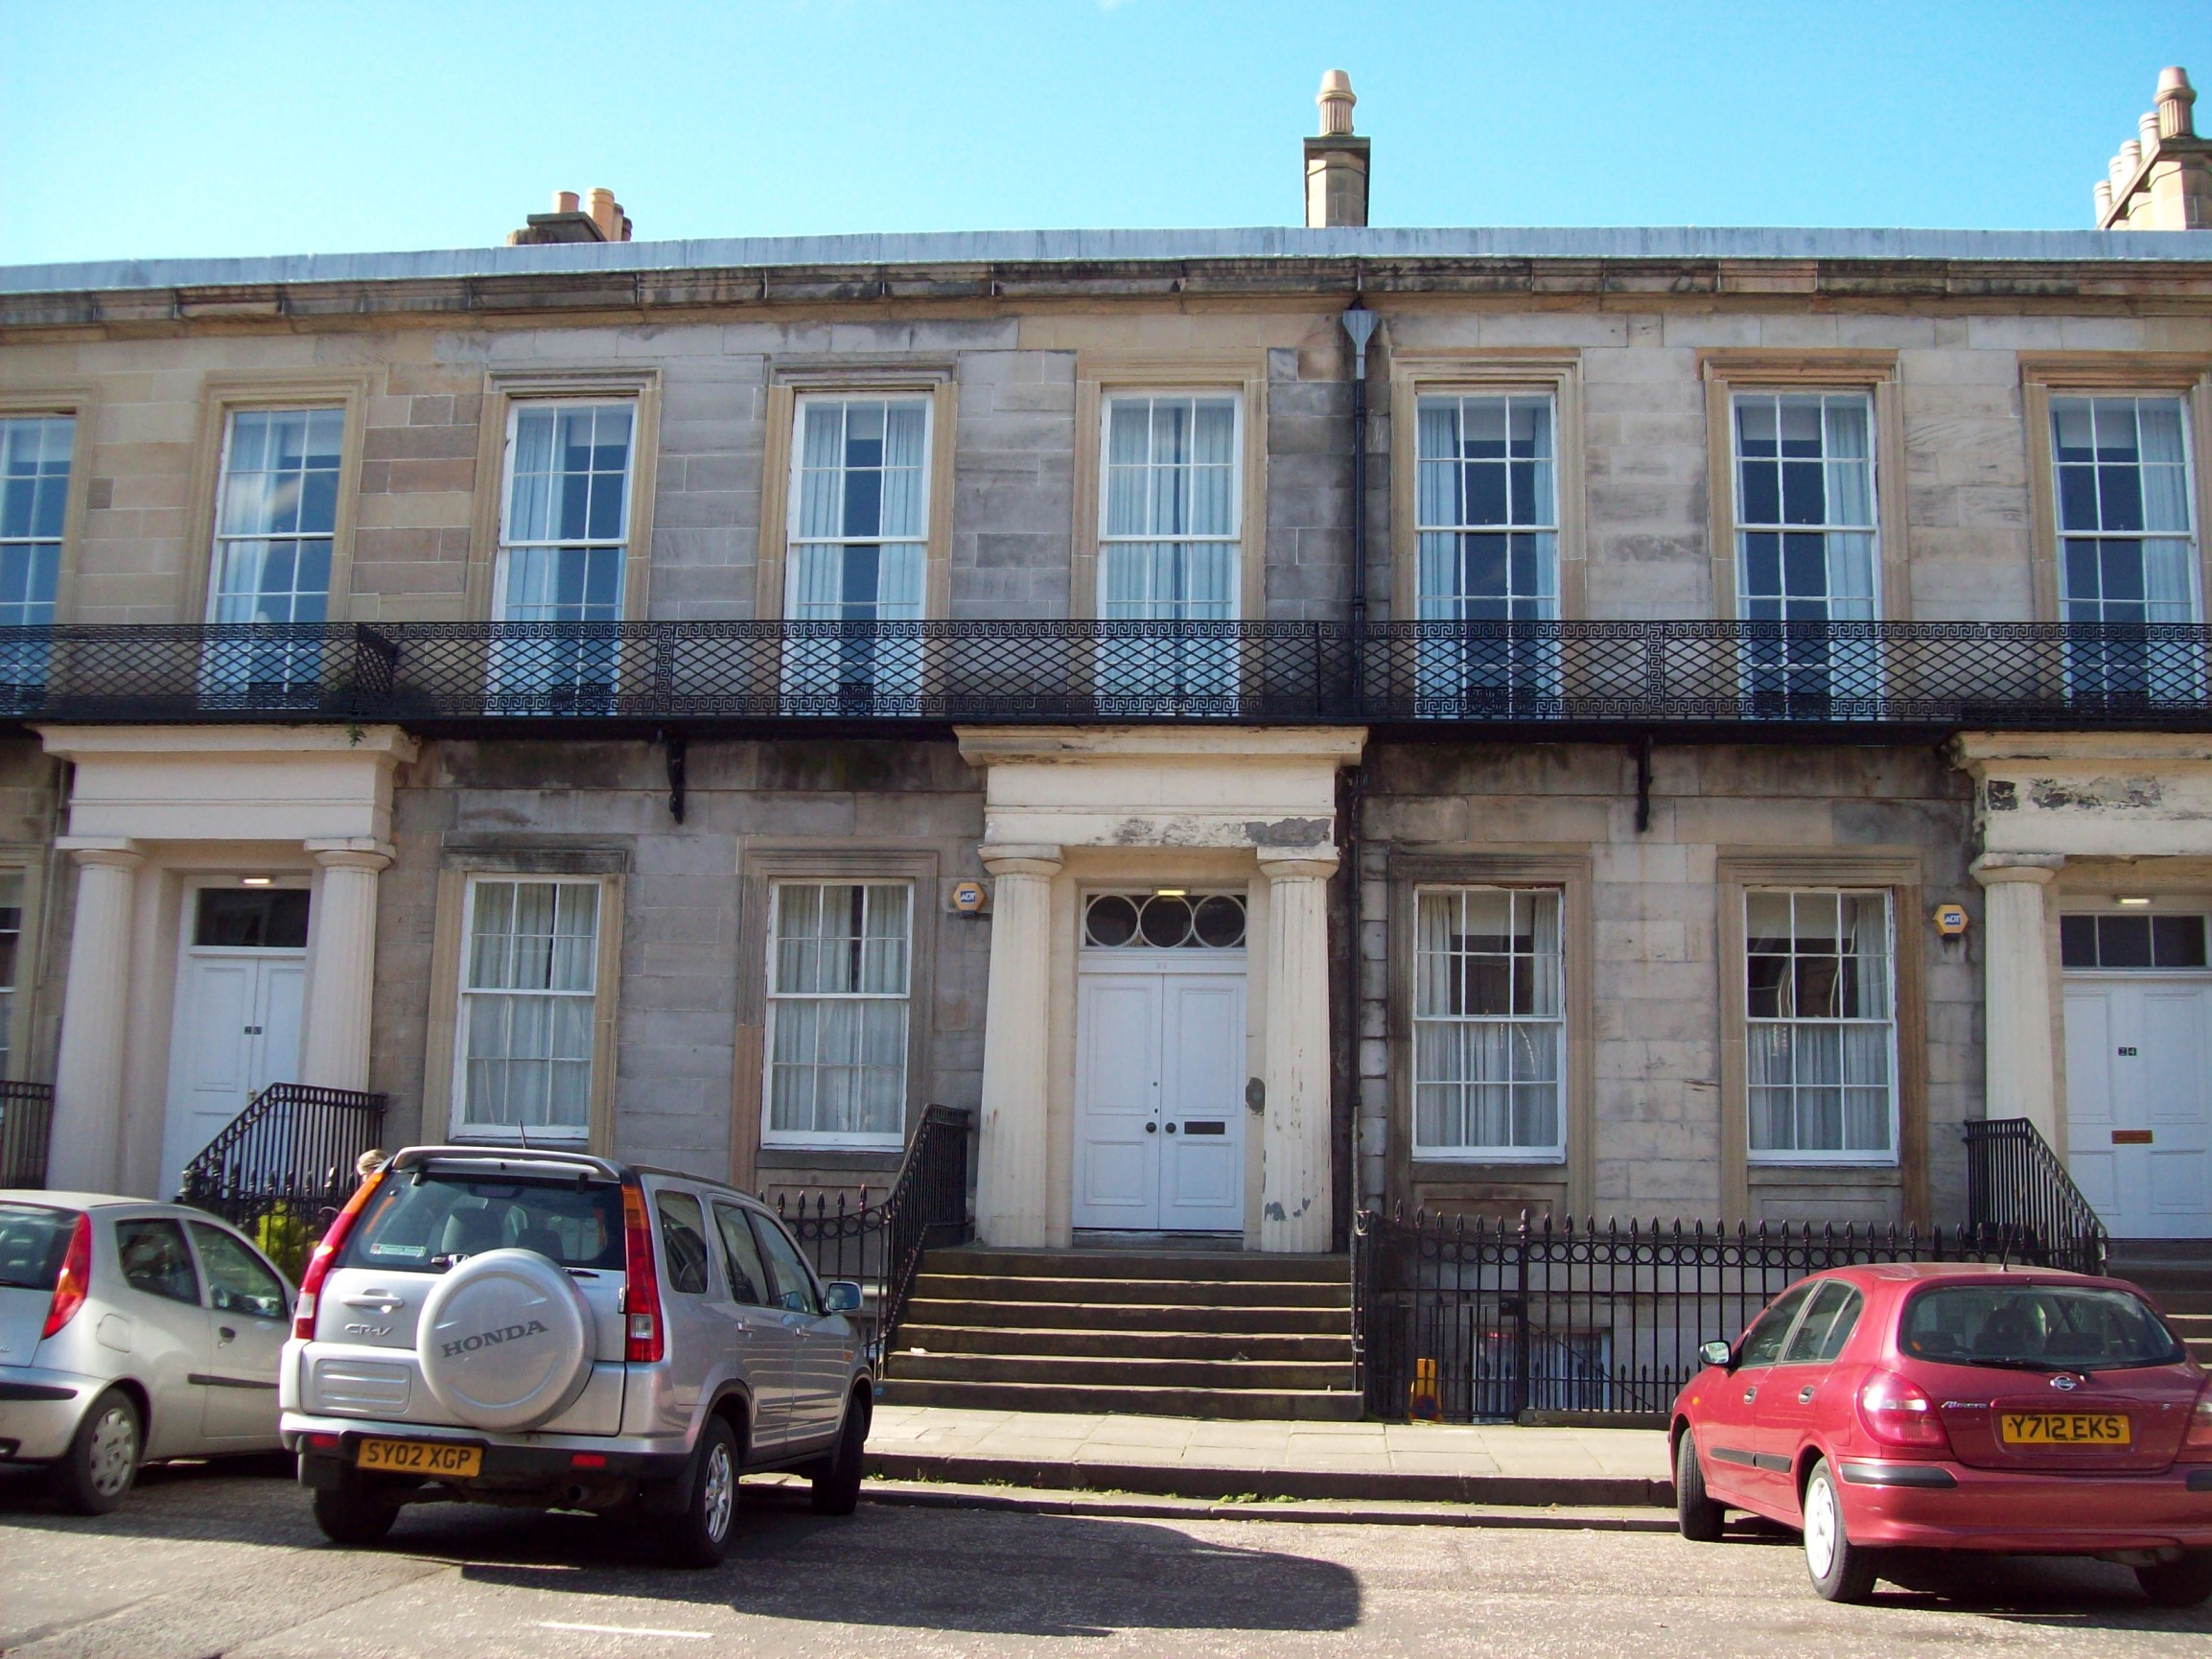 row of three-storey sandstone buildings having a basement storey partially below ground but visible through iron railings; then a ground floor with large windows and with double doors framed by classical porticoes painted cream, with flights of steps leading up from a pavement which slopes down to the right; then an upper floor with very large floor-to-ceiling windows, in front of which is a low black-painted metal grille running the length of the street and probably intended to hold window-boxes